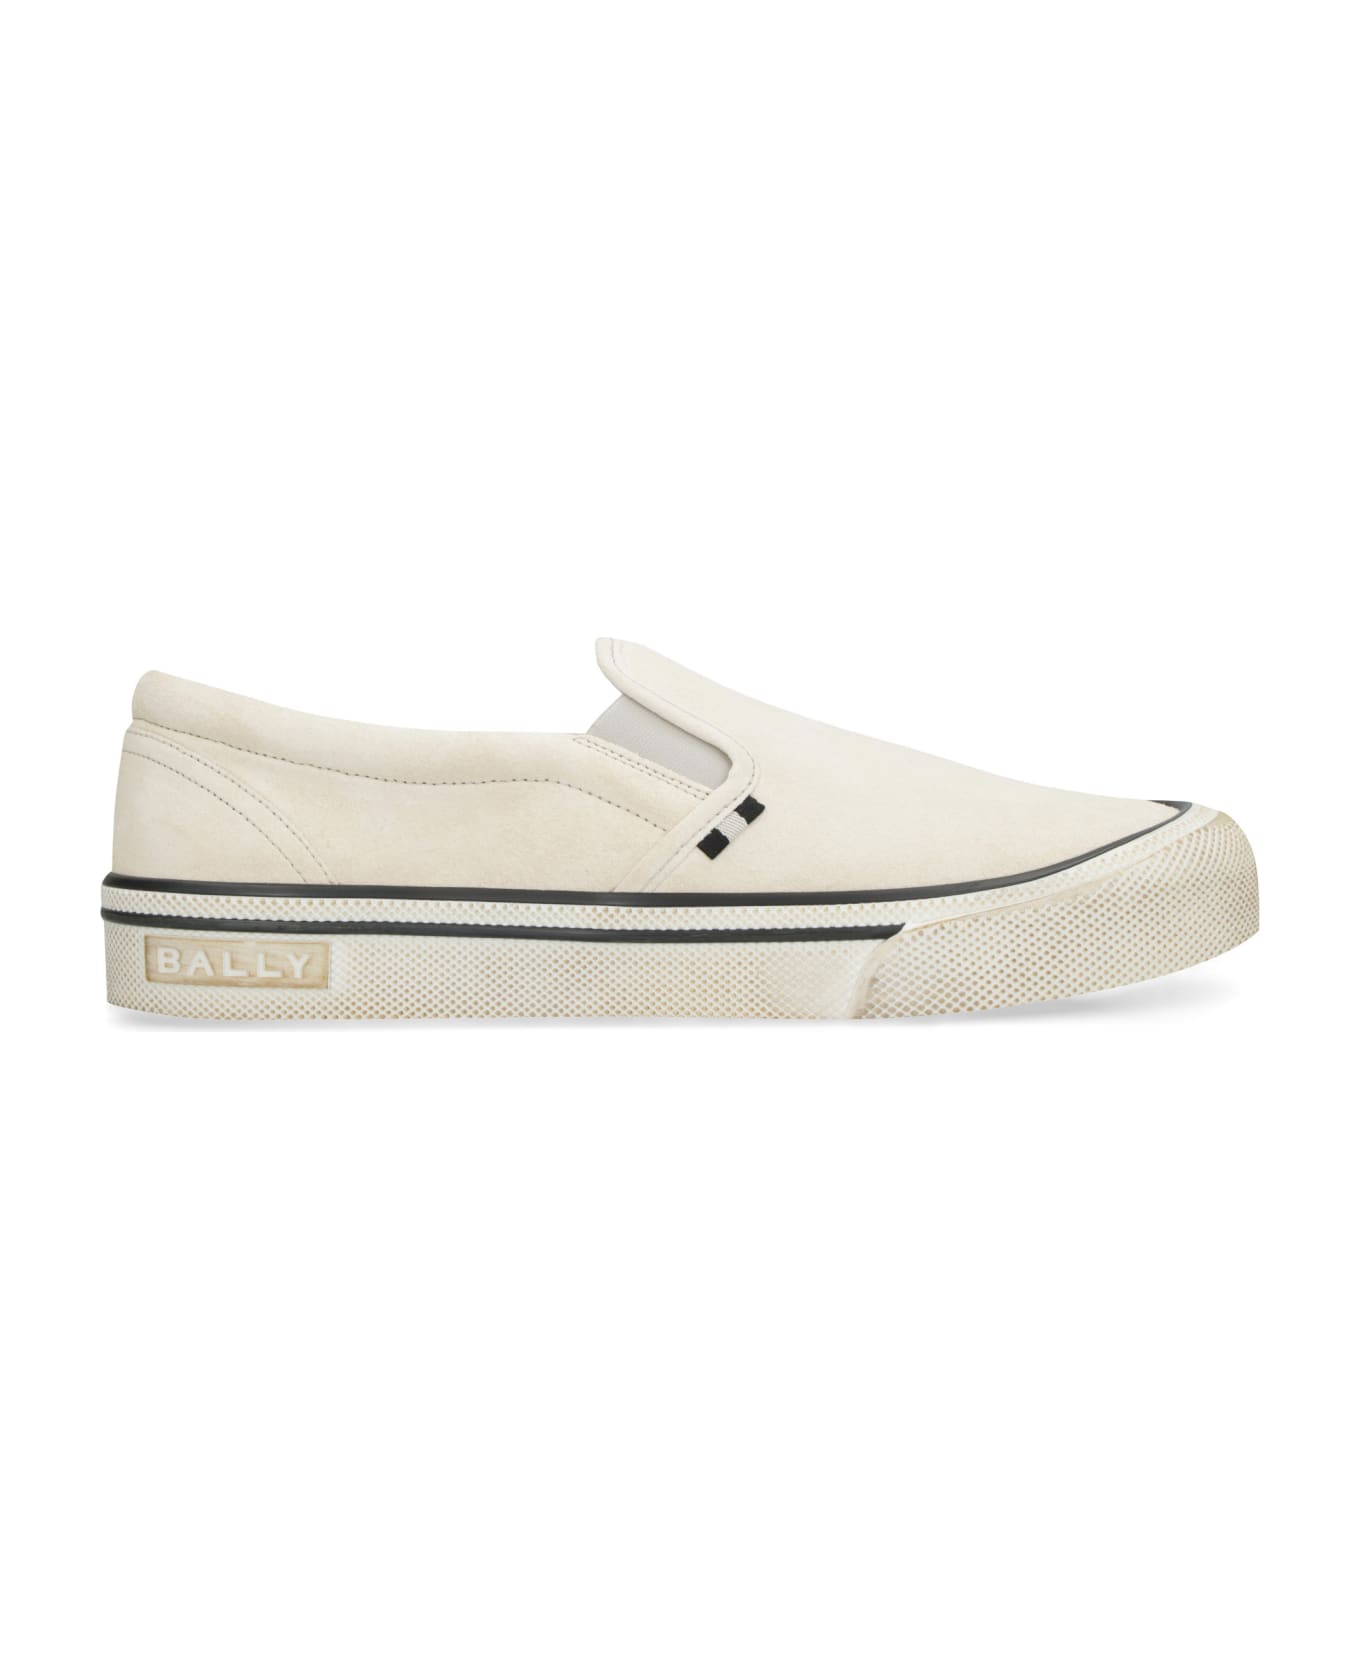 Bally Slip-on Sneakers In Suede - panna スニーカー